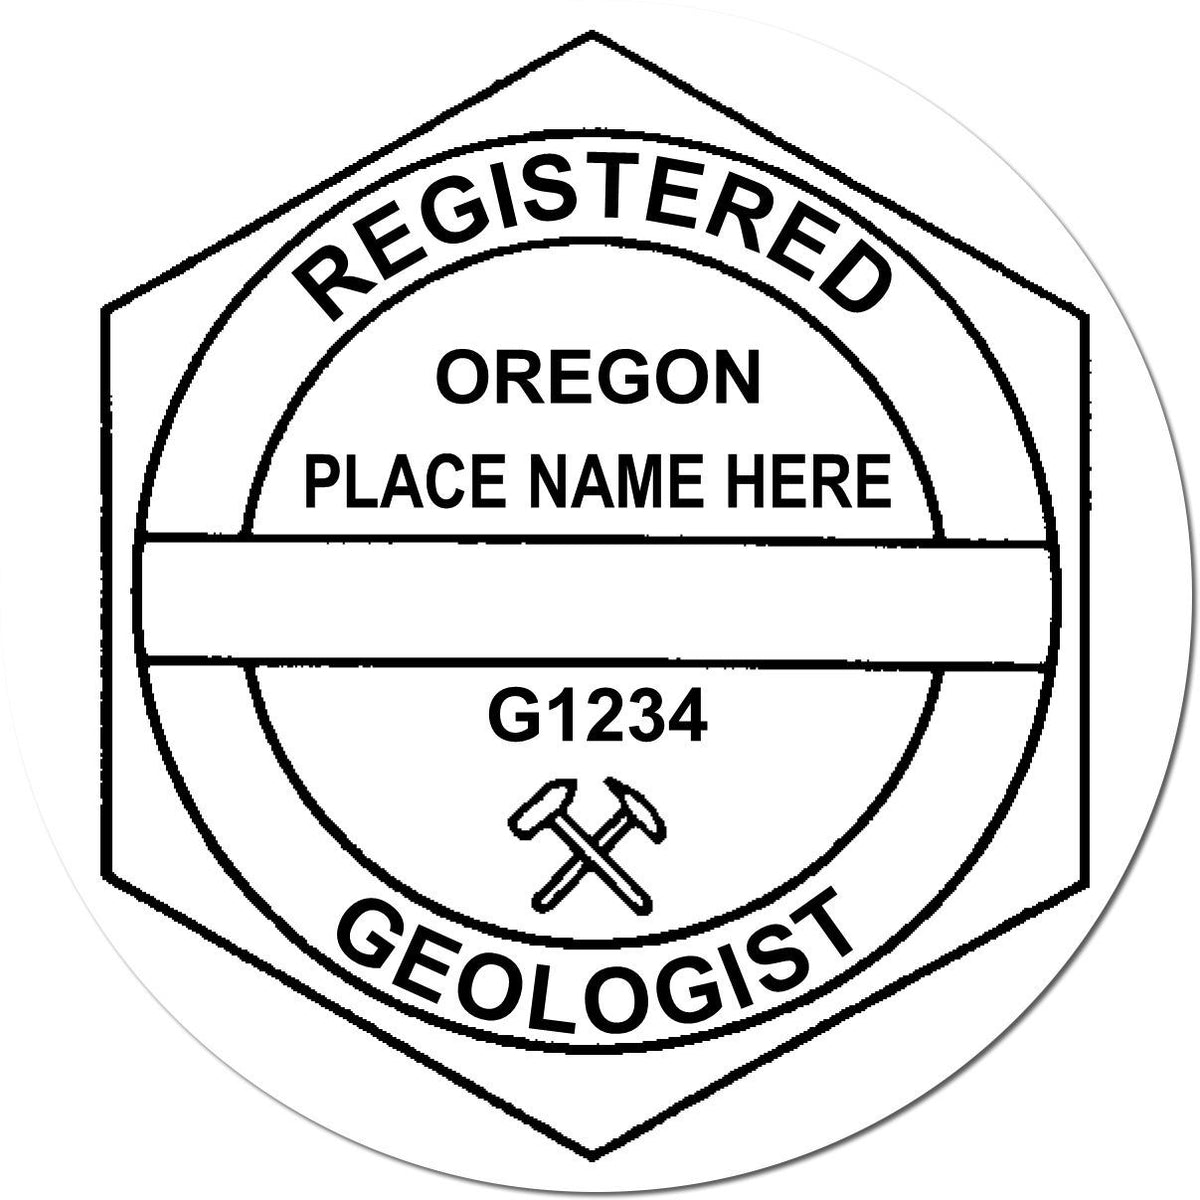 An alternative view of the Premium MaxLight Pre-Inked Oregon Geology Stamp stamped on a sheet of paper showing the image in use